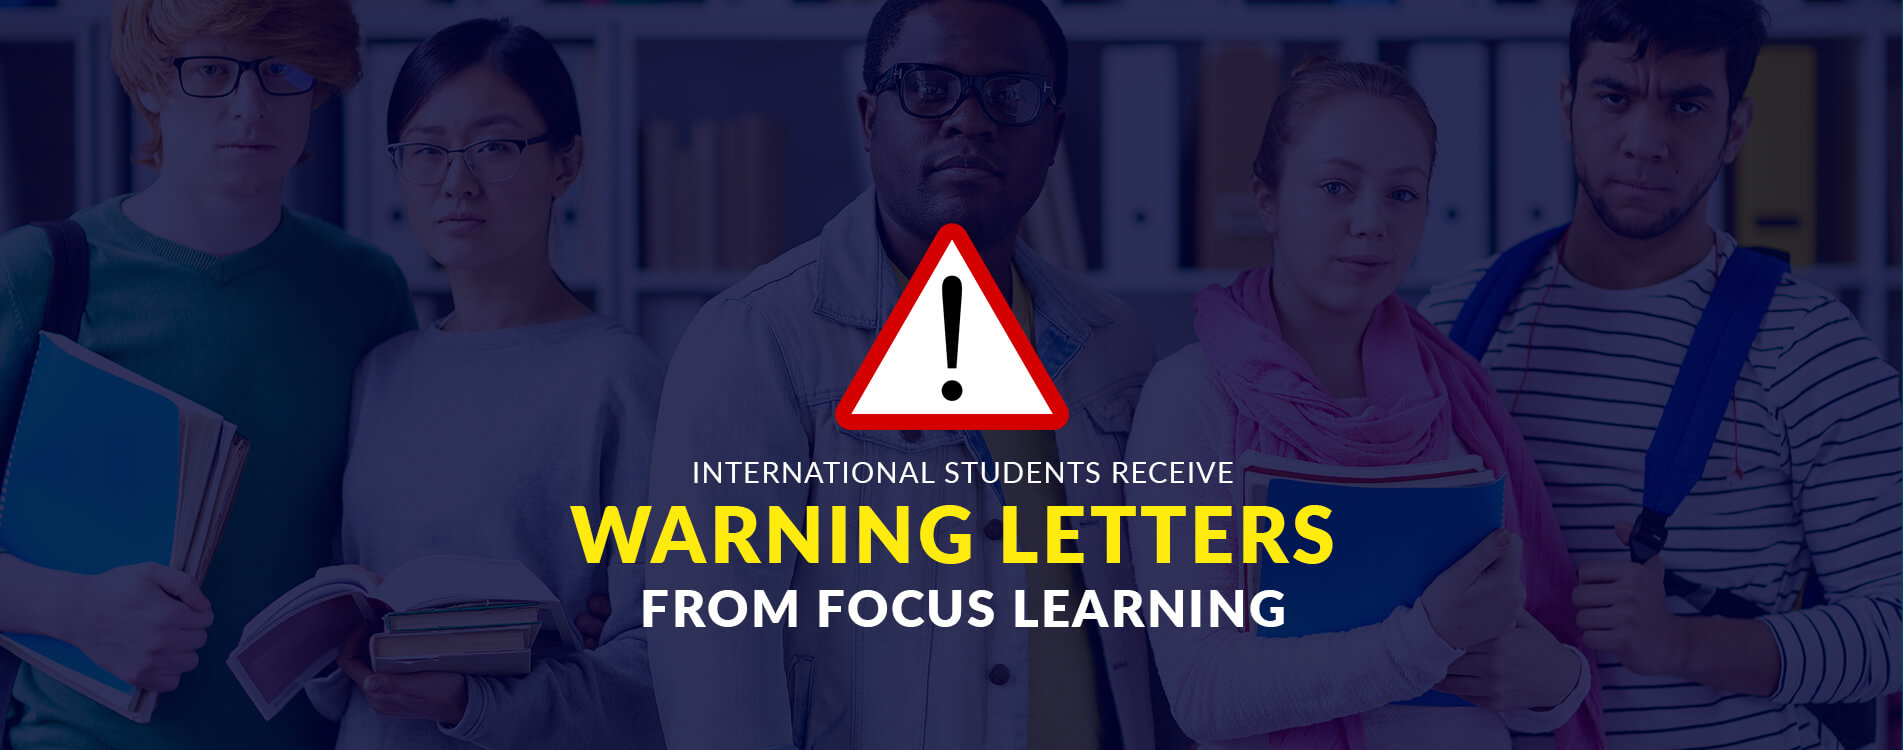 International Students Receive ‘Warning Letters’ from Focus Learning in Melbourne